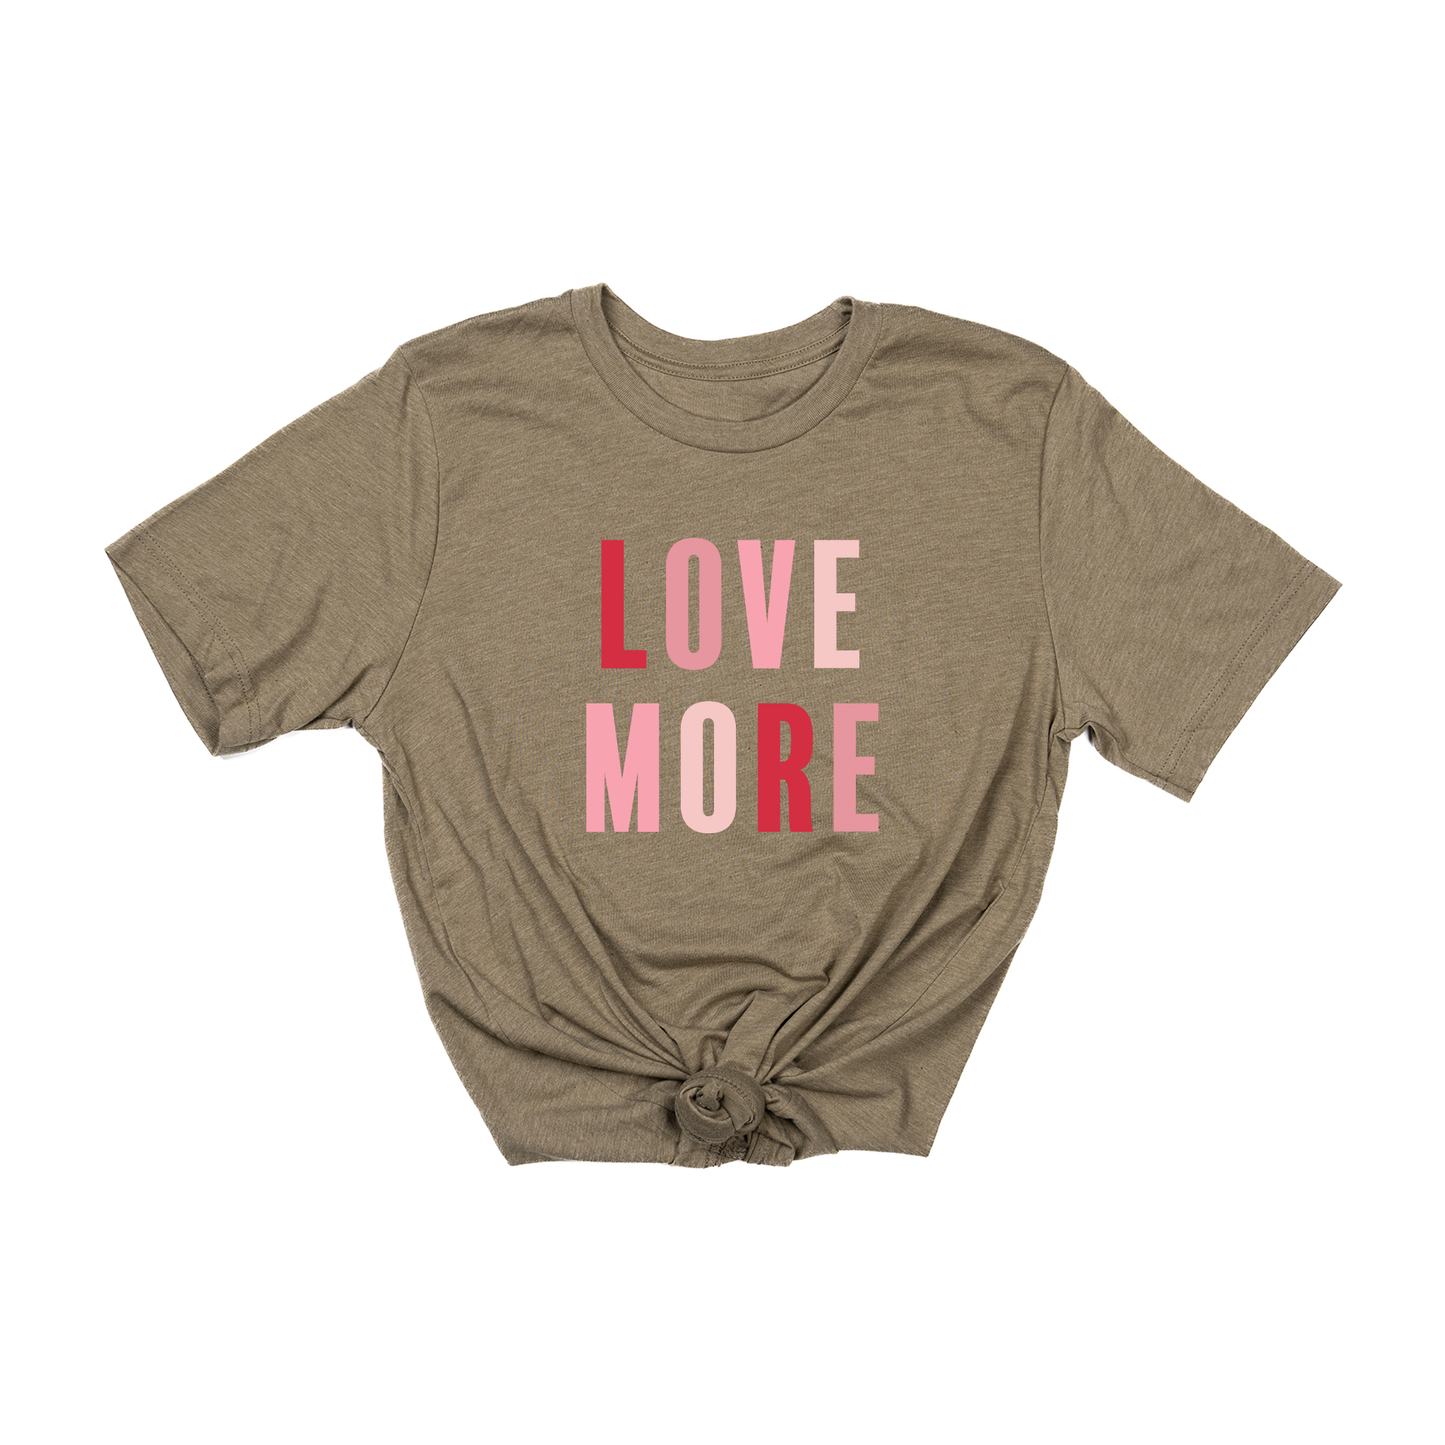 Love More (Across Front) - Tee (Olive)